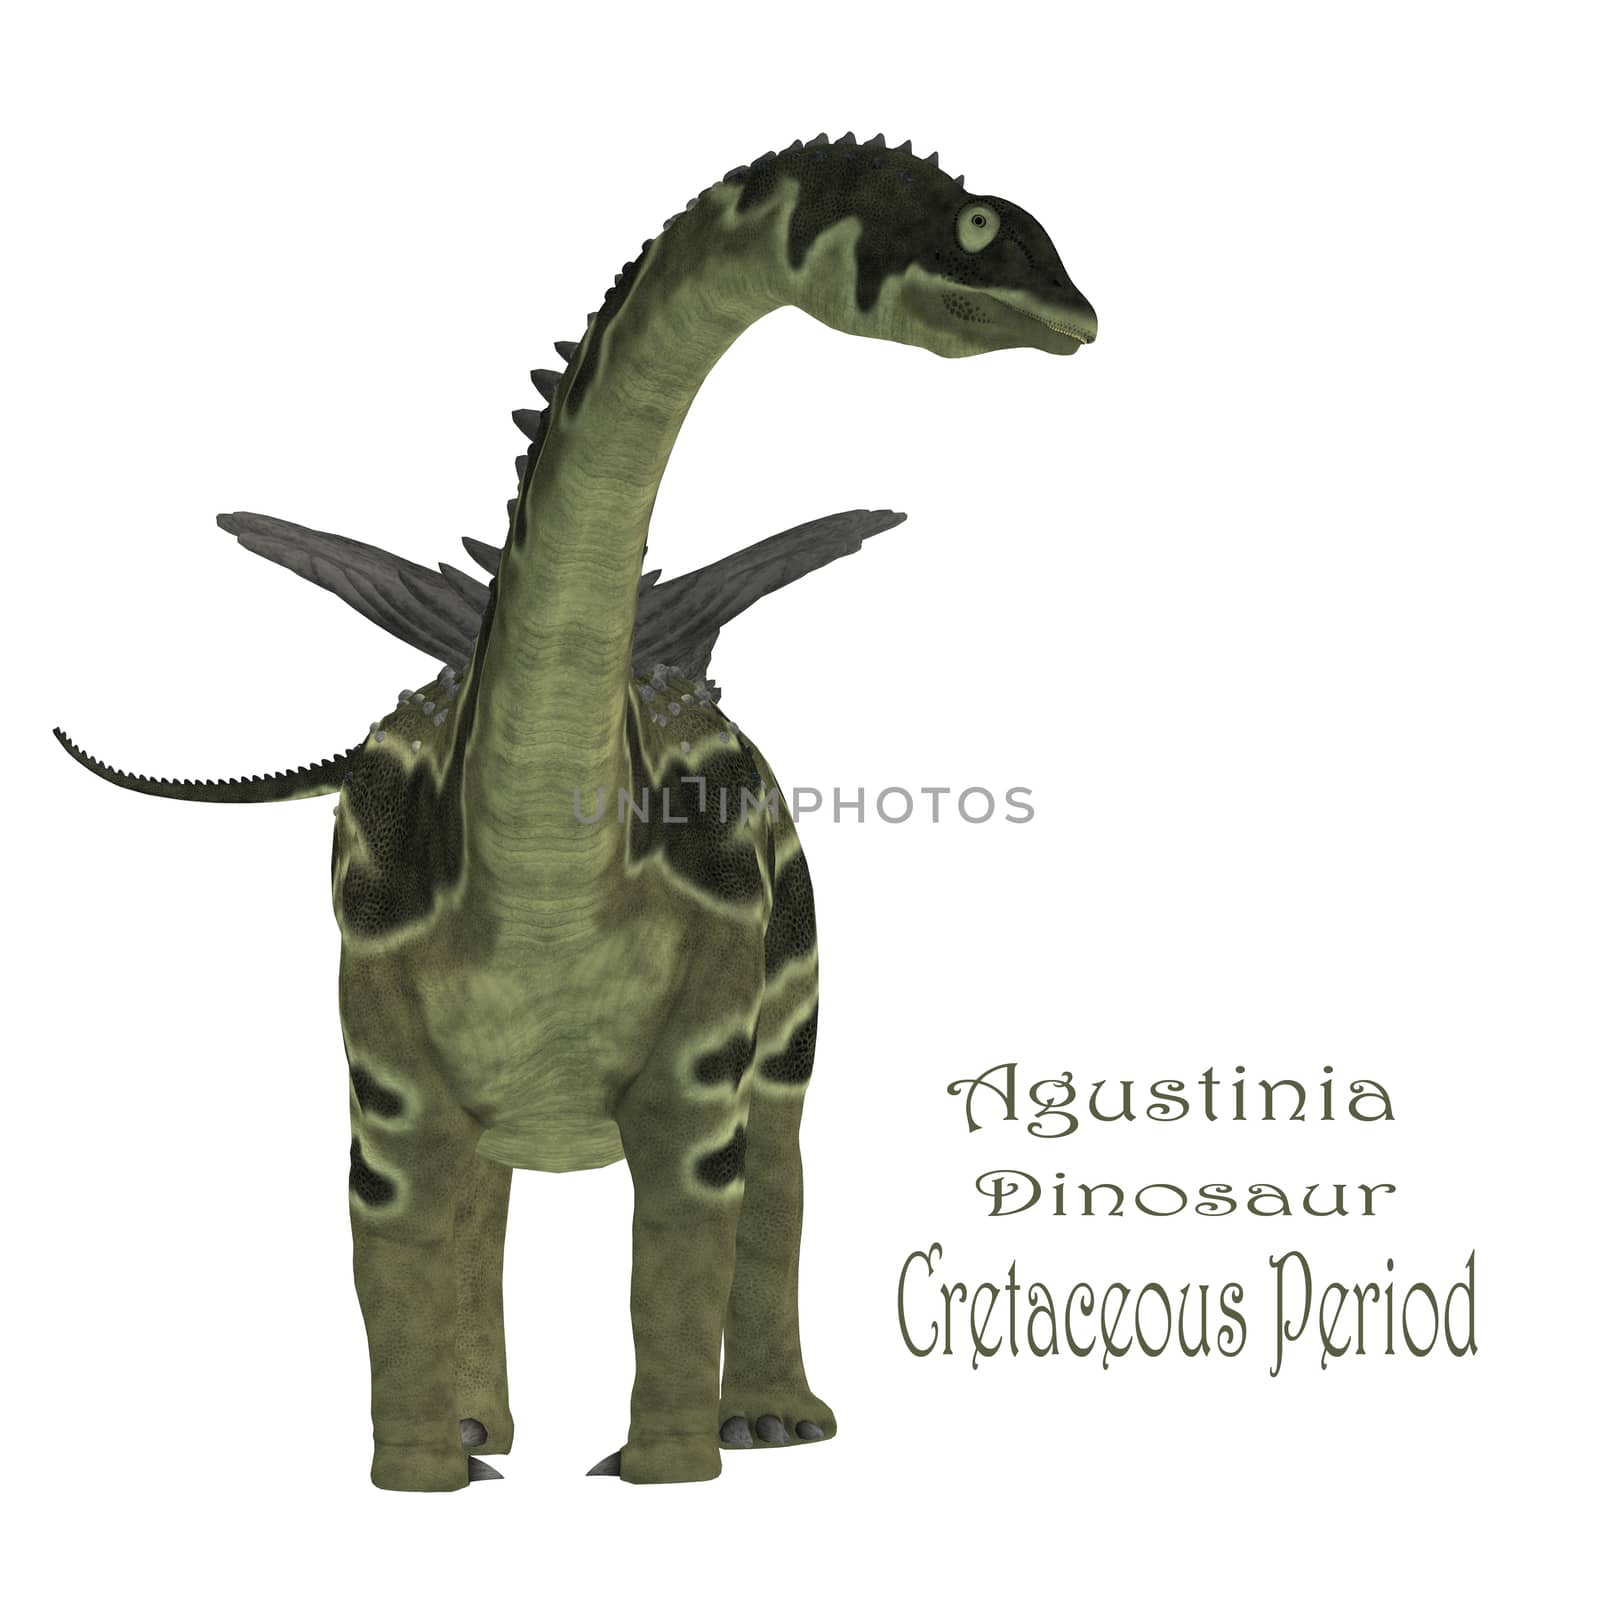 Agustinia was a herbivorous sauropod dinosaur that lived in South America in the Cretaceous Period.